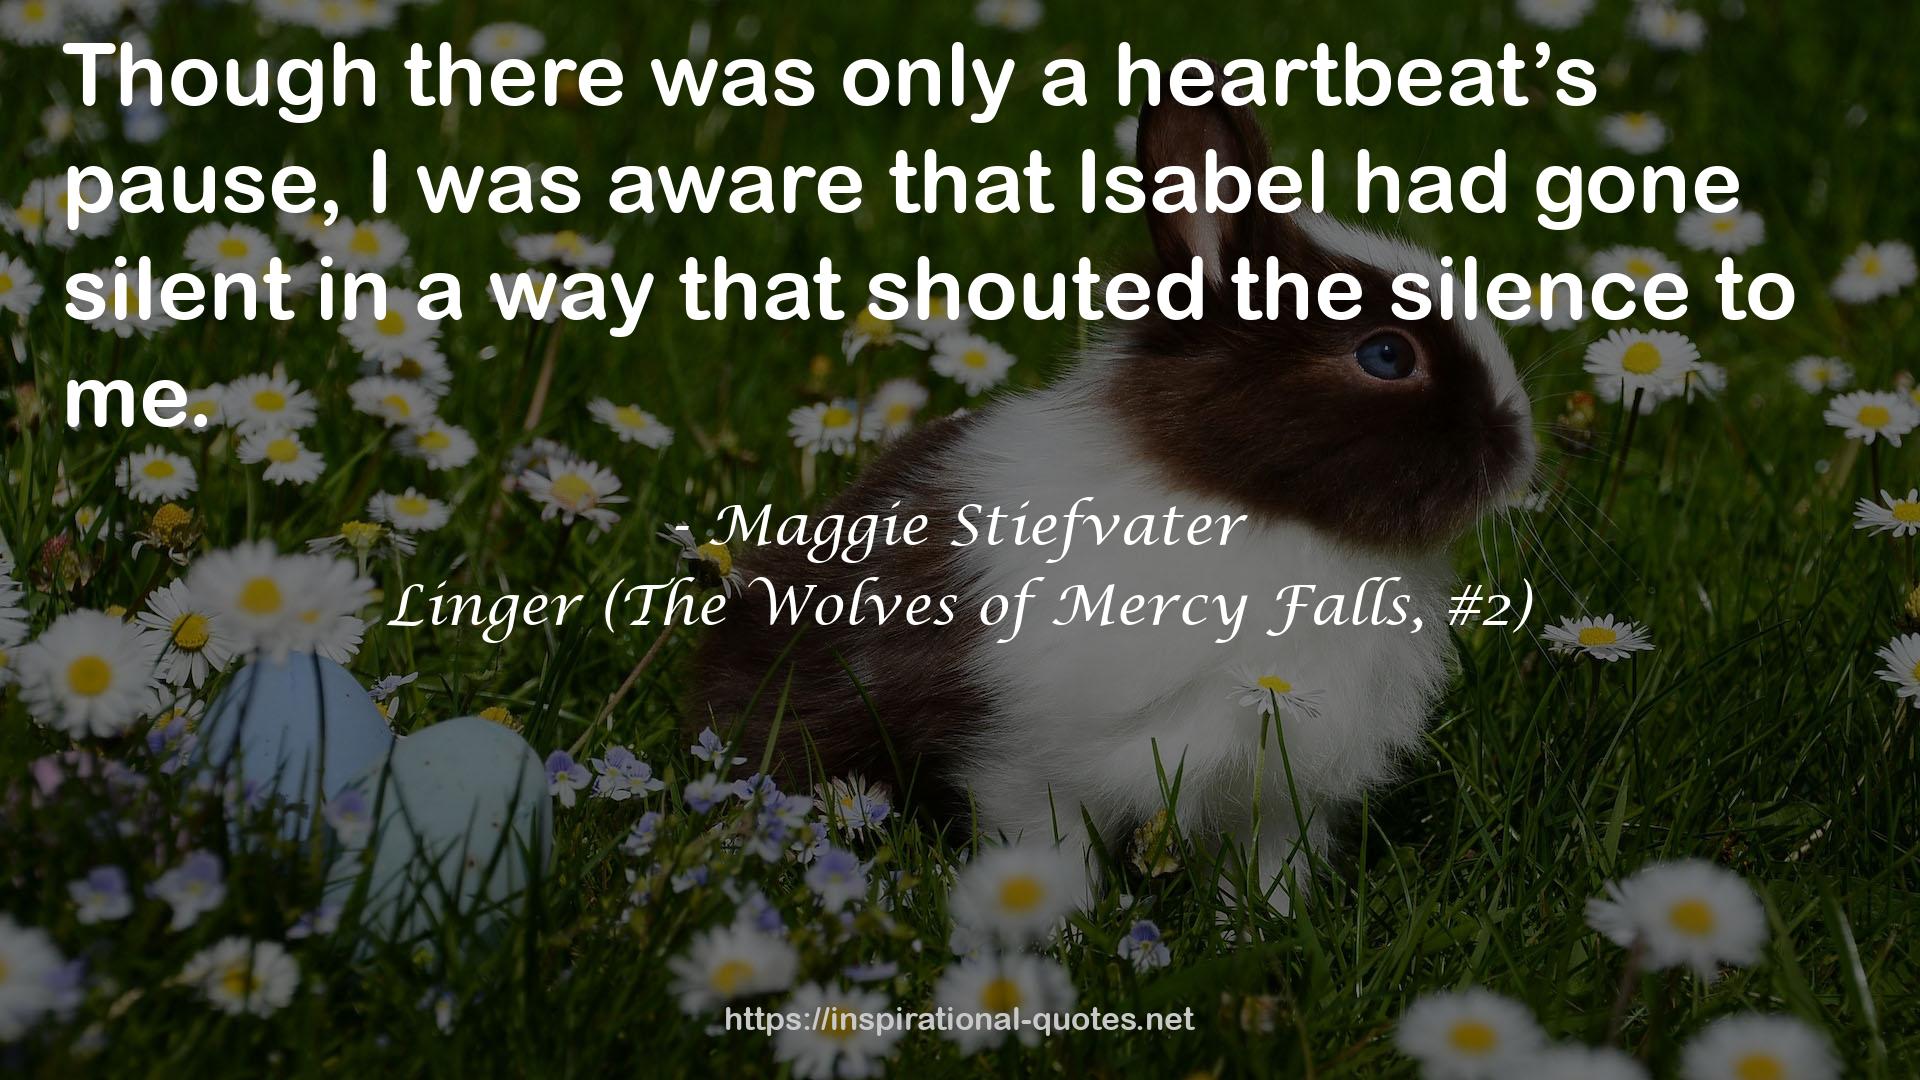 Linger (The Wolves of Mercy Falls, #2) QUOTES